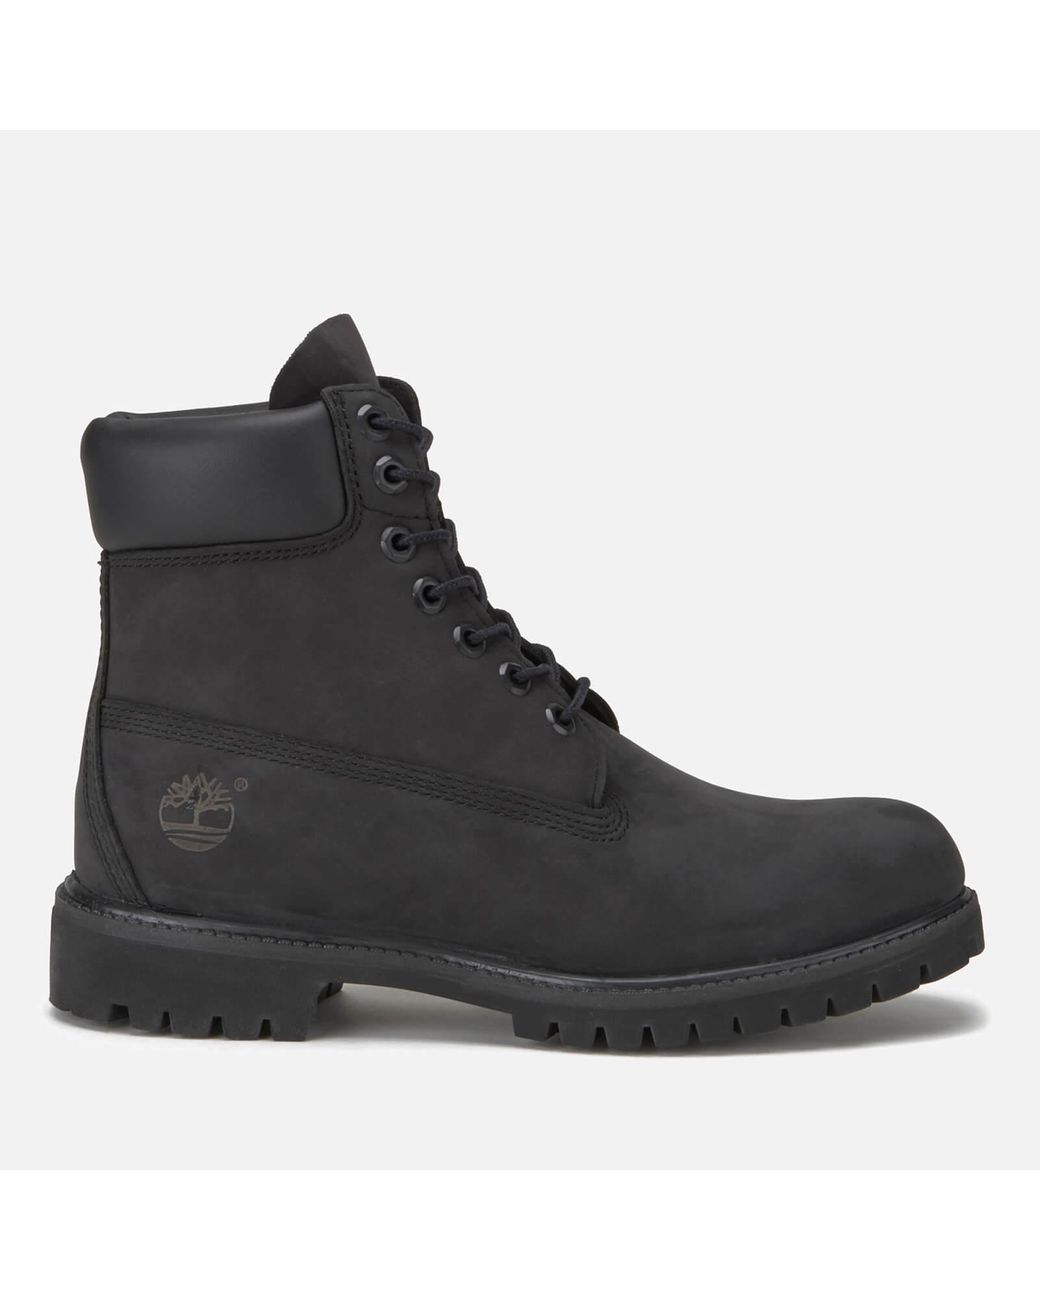 Timberland Leather 6 Inch Premium Waterproof Boots in Black for Men - Lyst